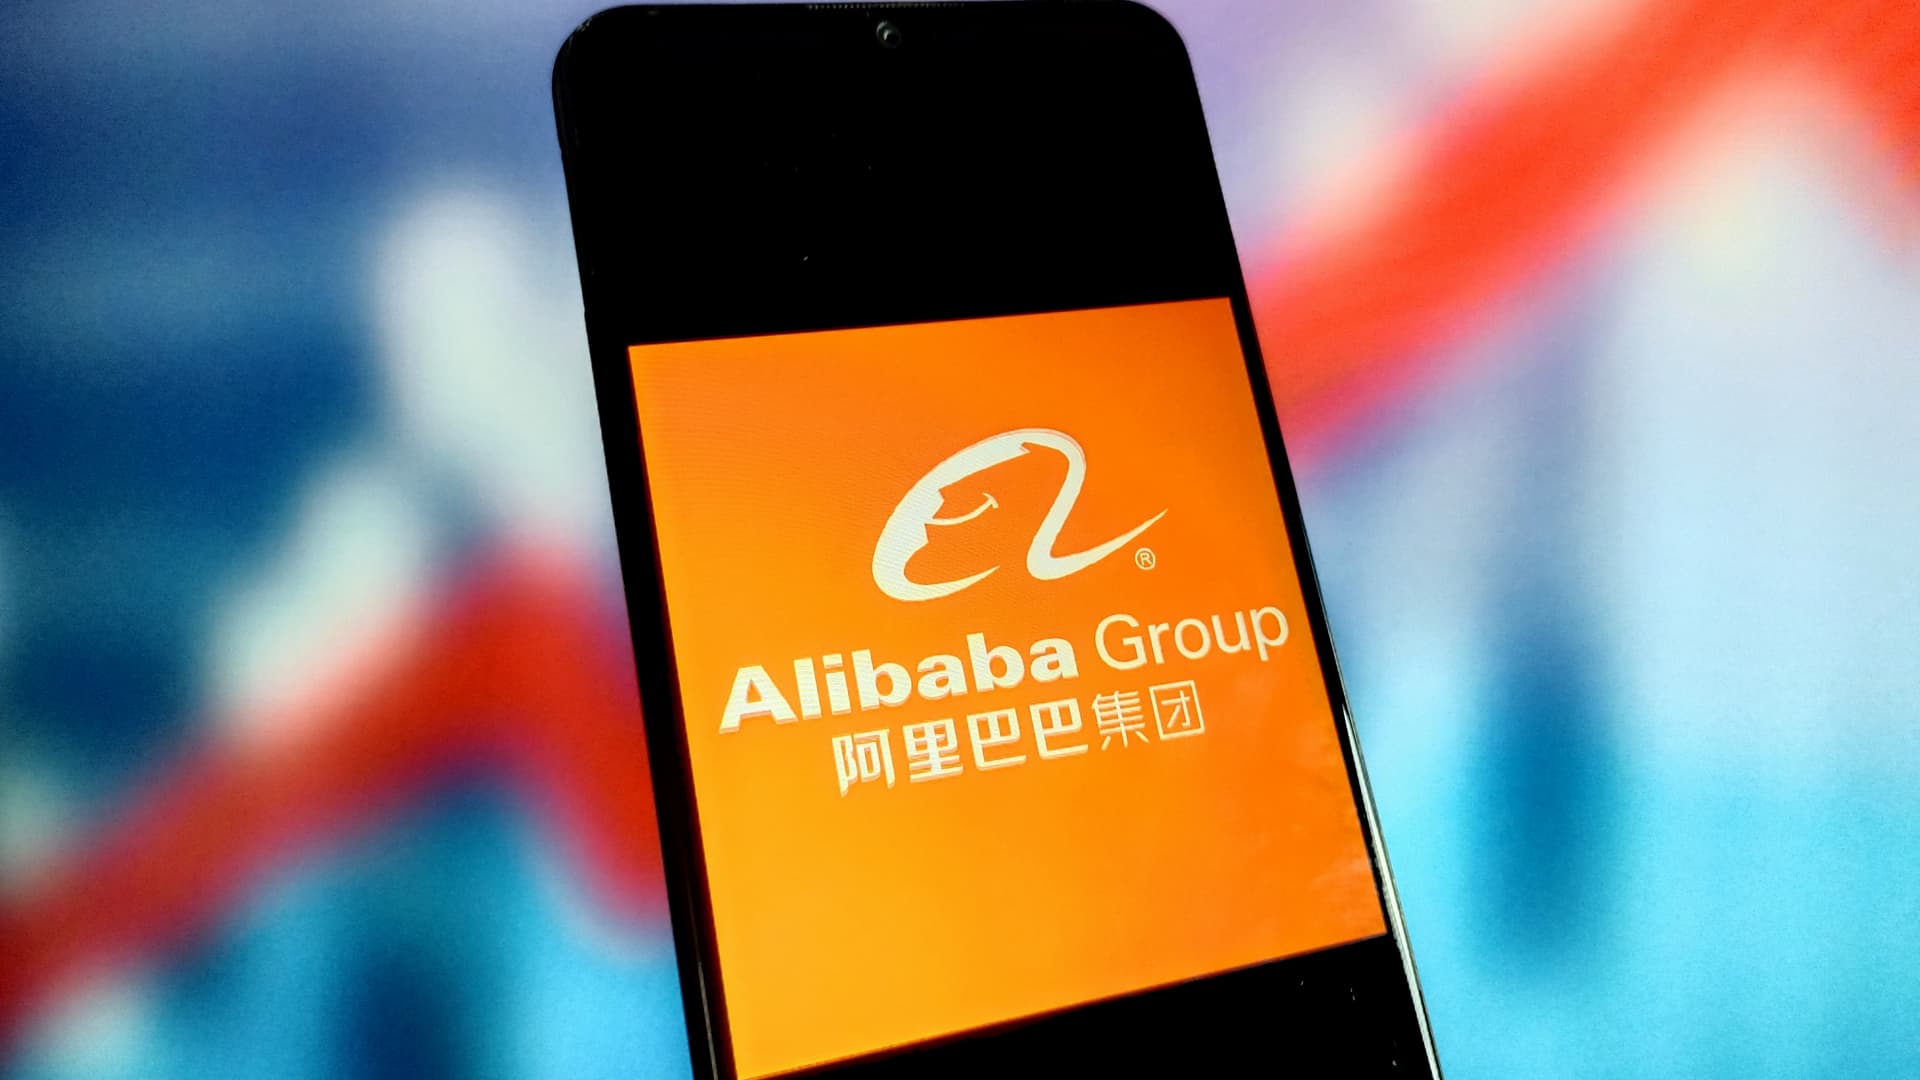 Alibaba shares jump 4% in premarket trade after it hikes share buyback program by  billion